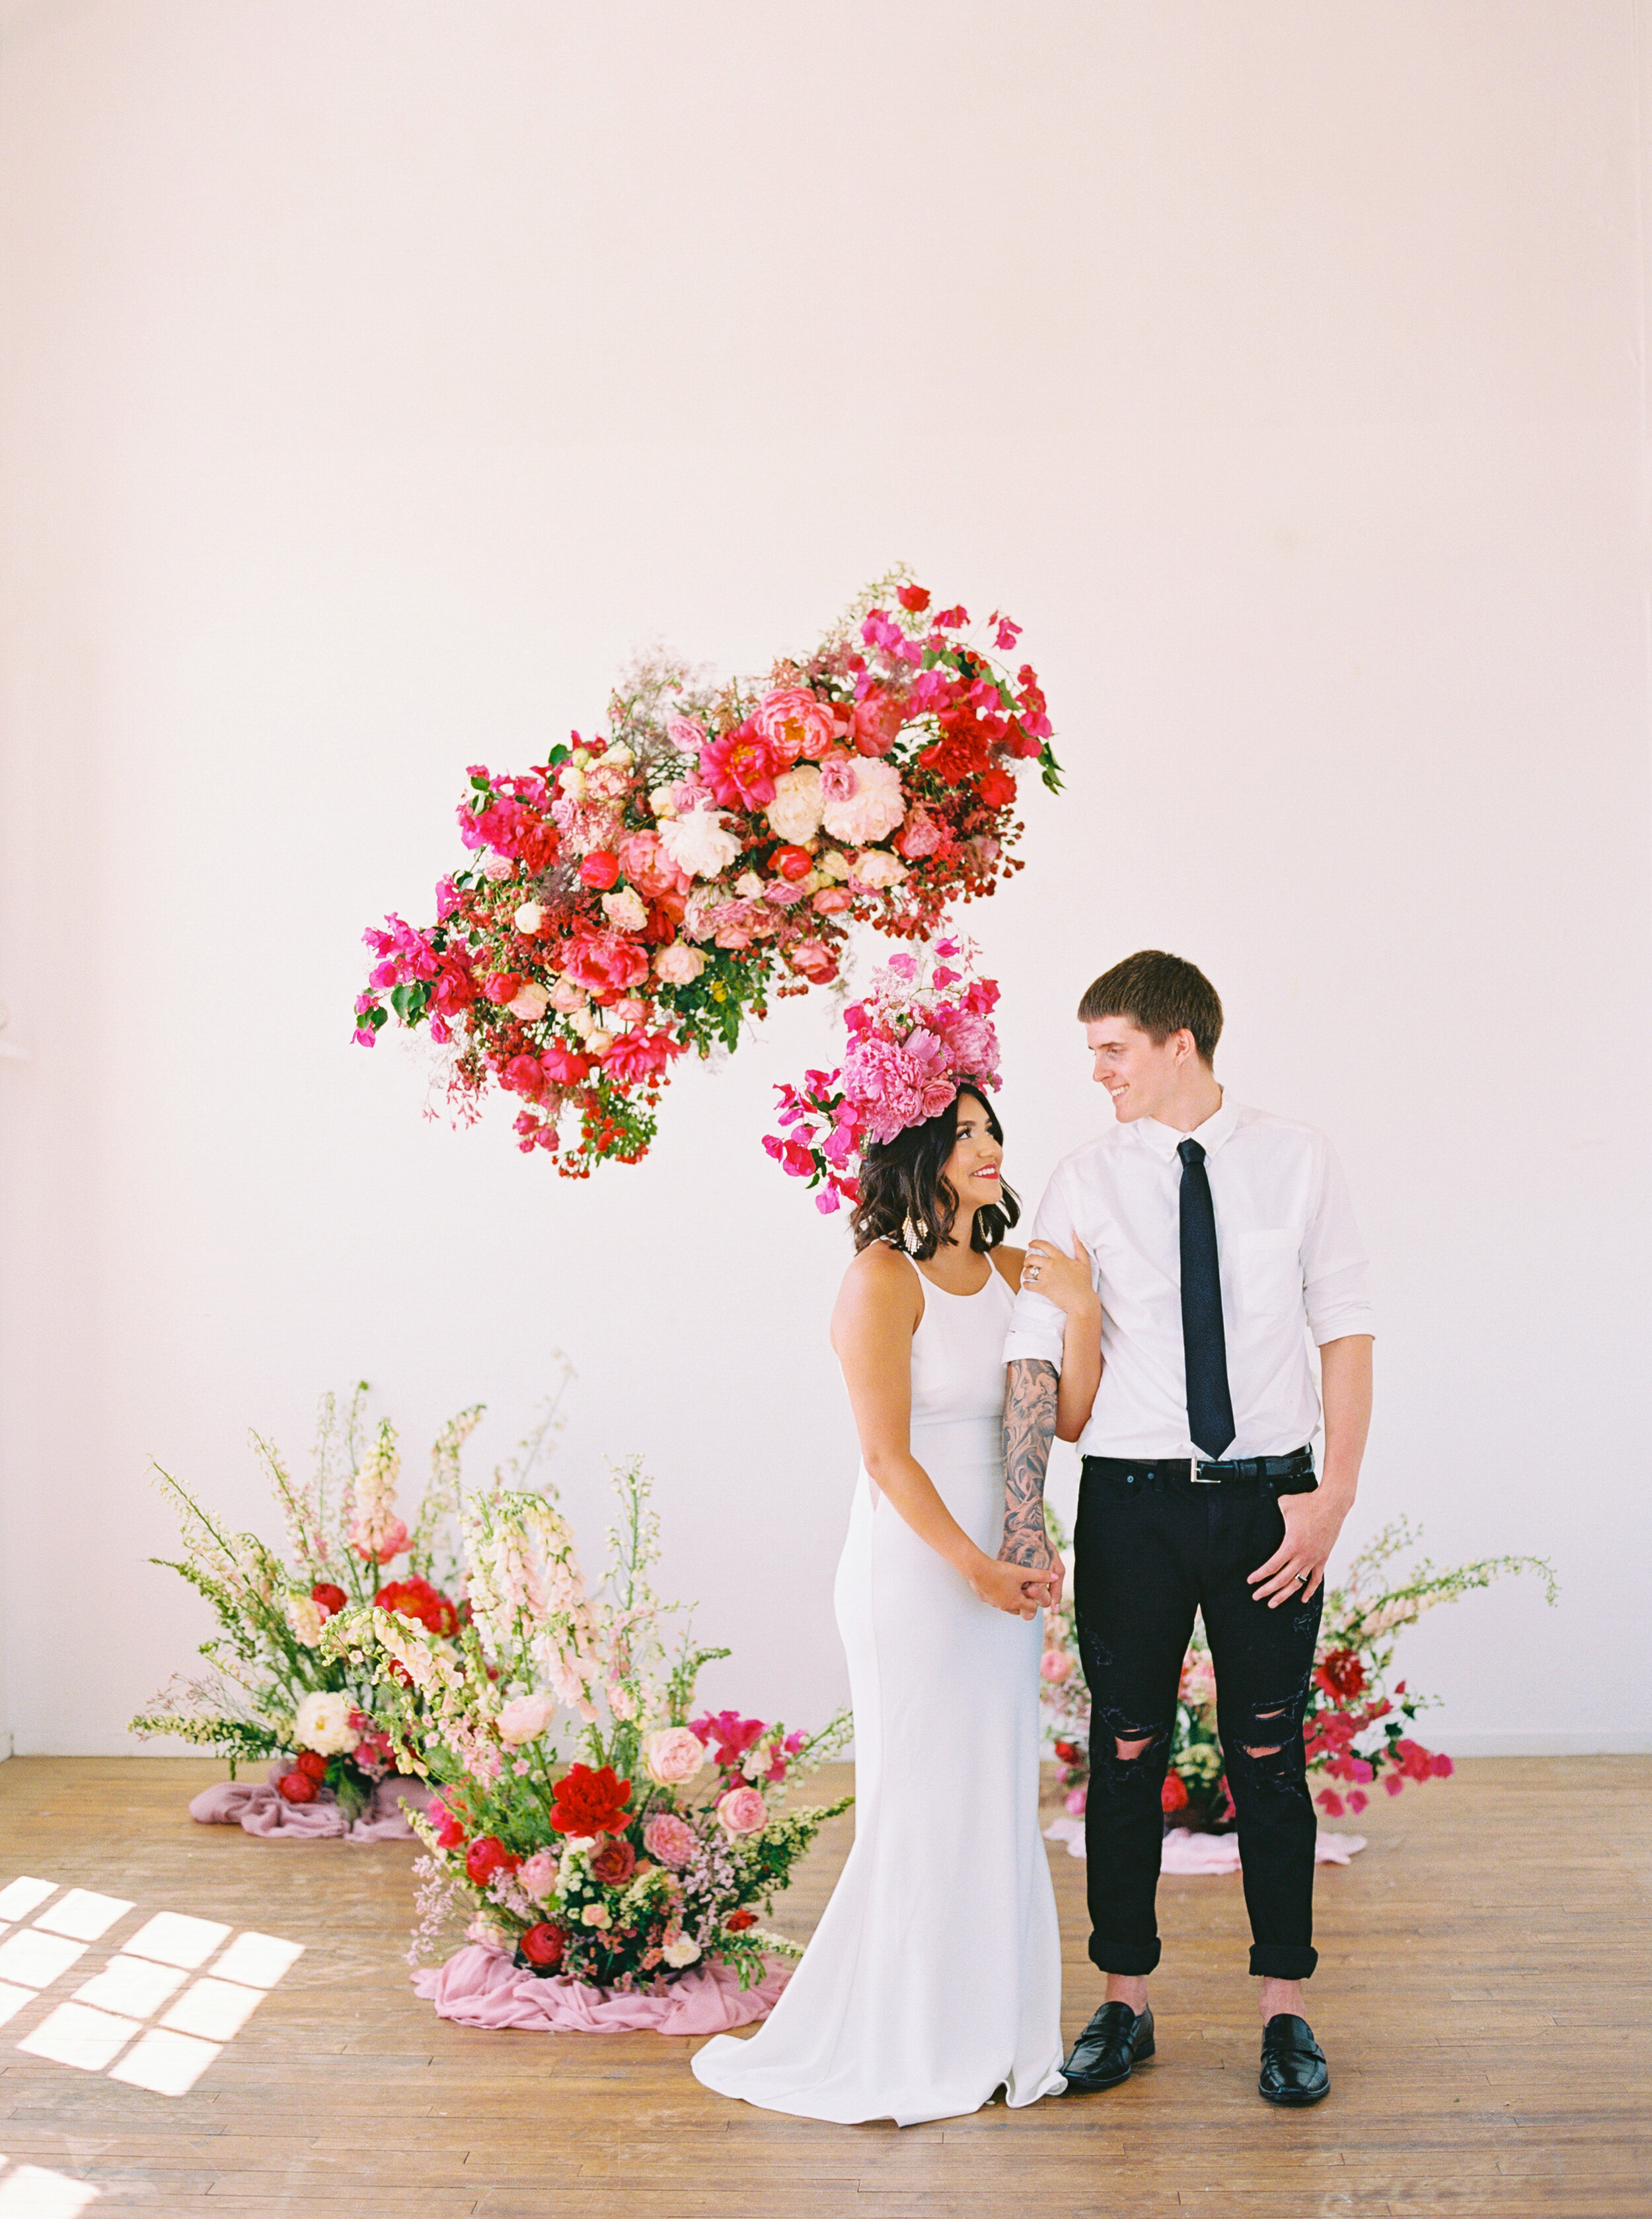 A Romantic Wedding Elopement Filled with Colorful Fuchsia - Sarahi Hadden Submission-65.jpg